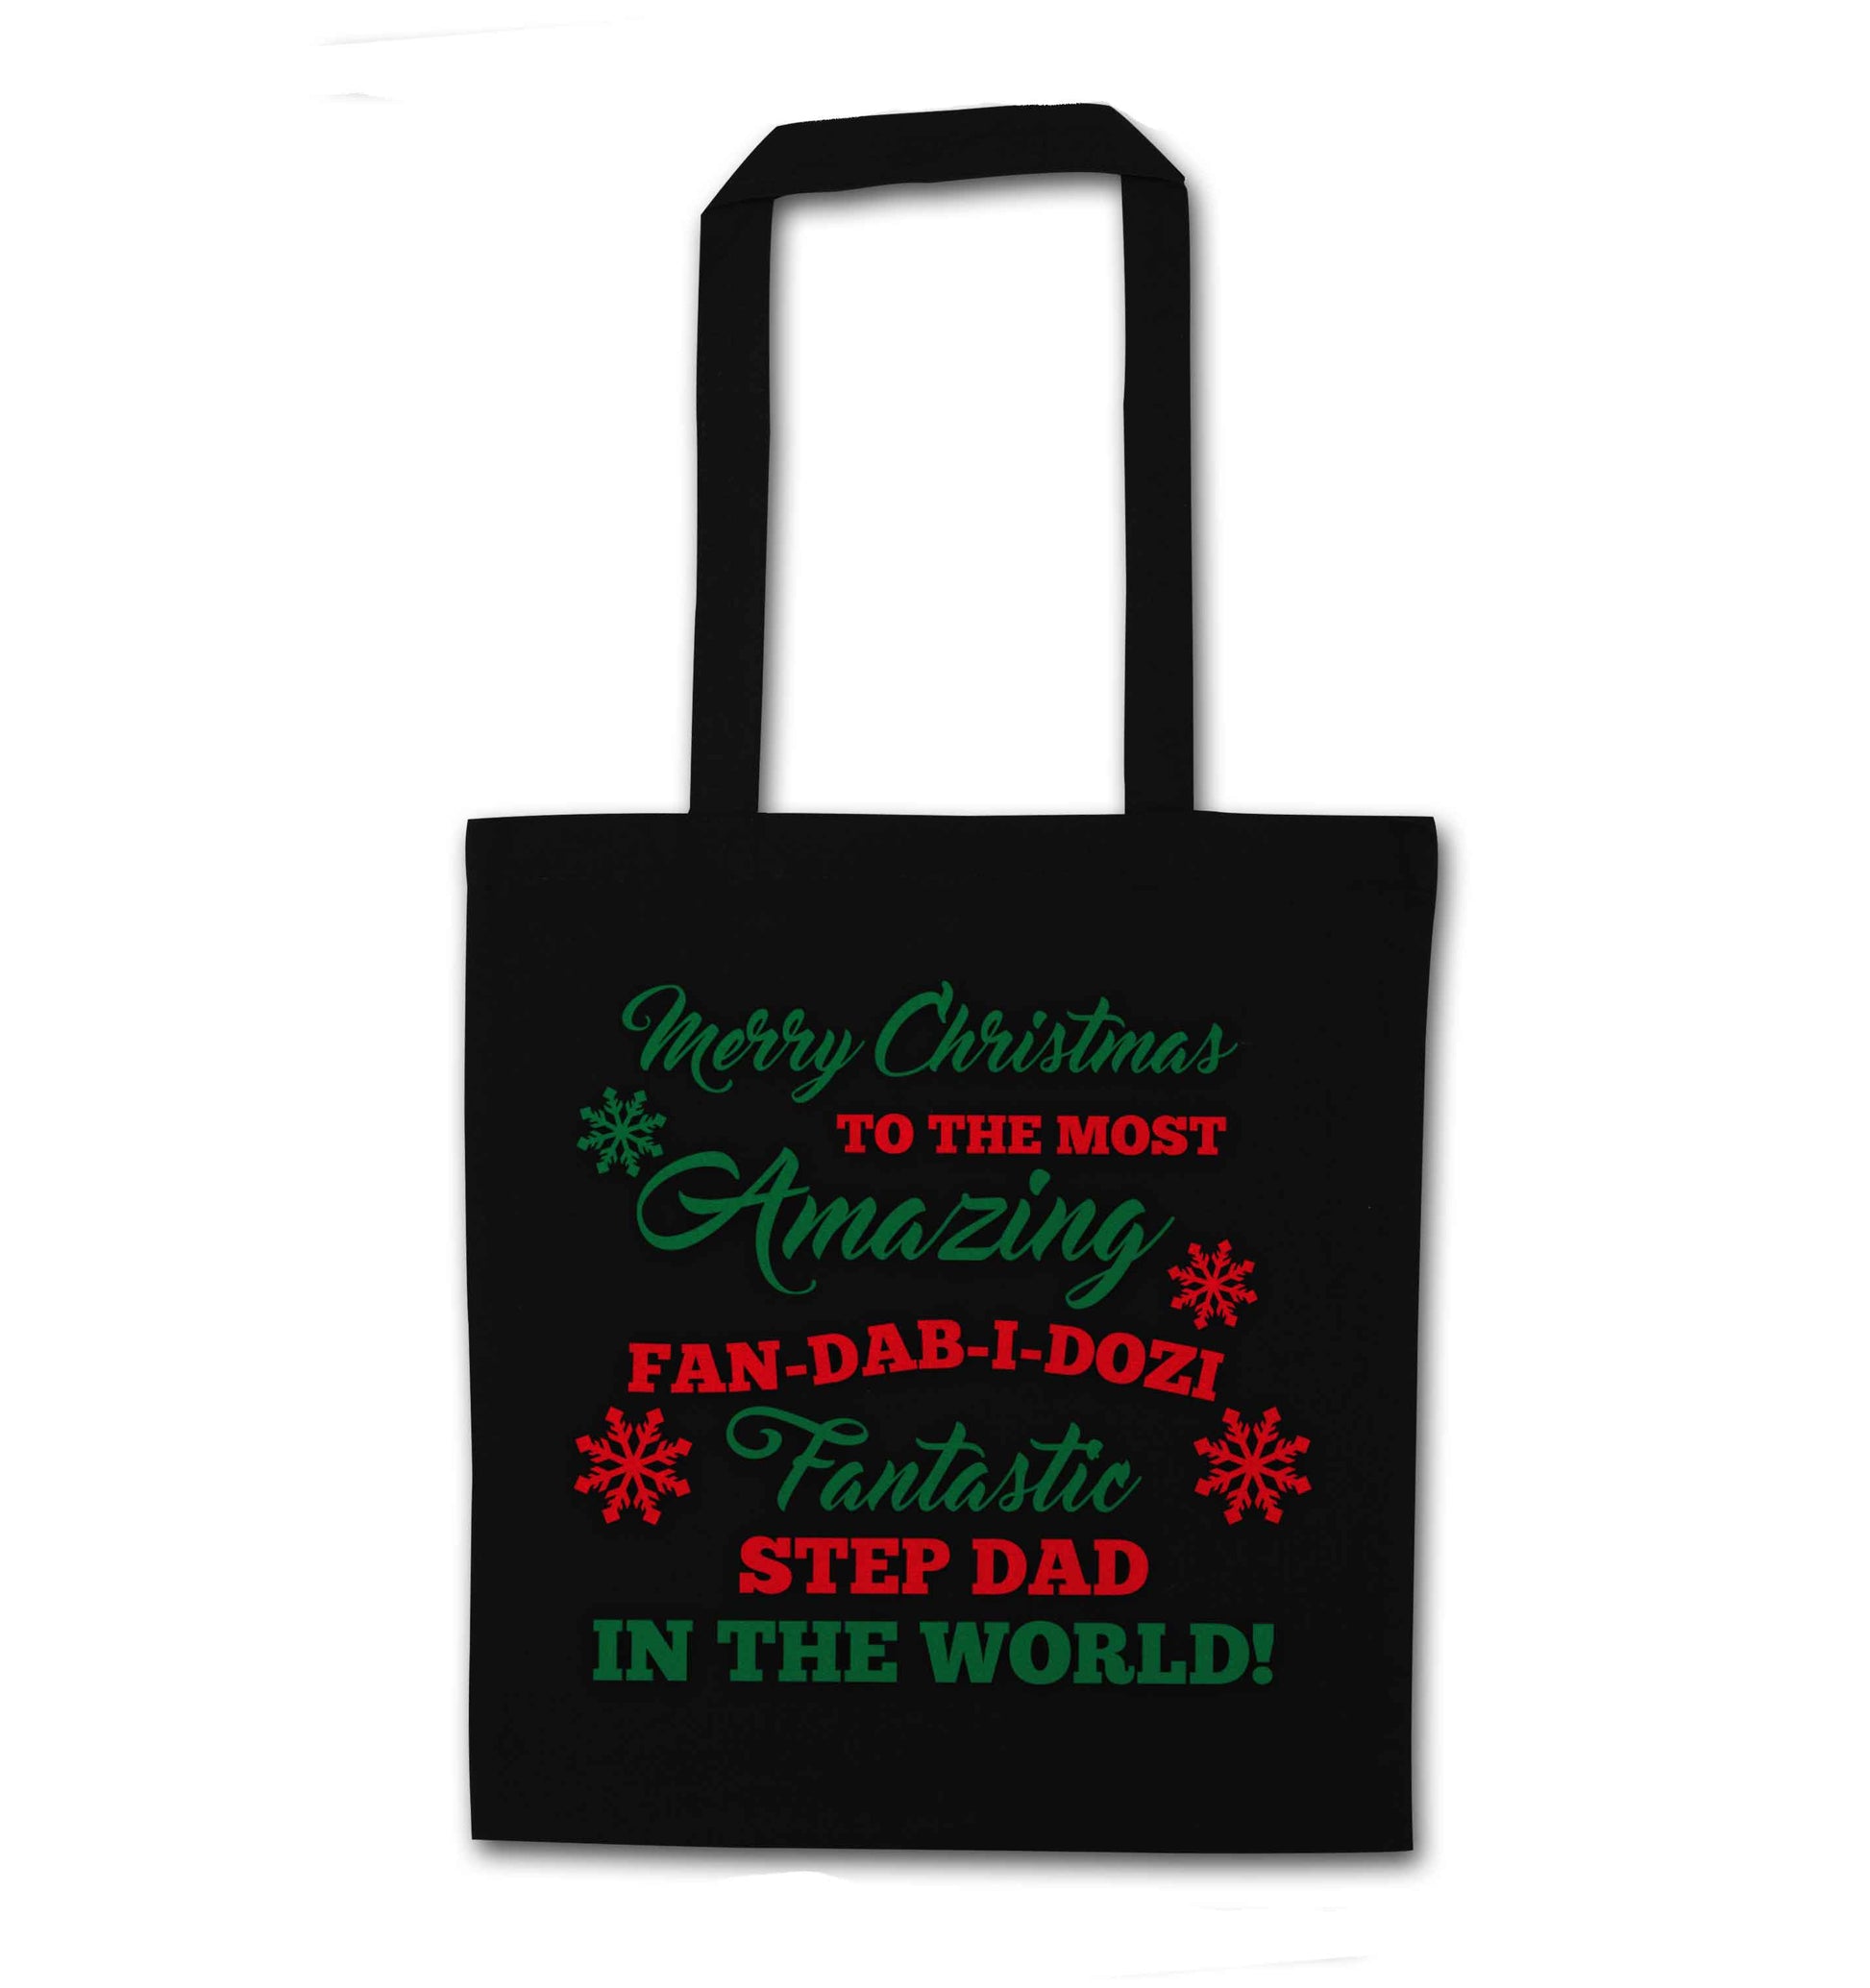 Merry Christmas to the most amazing fan-dab-i-dozi fantasic Step Dad in the world black tote bag